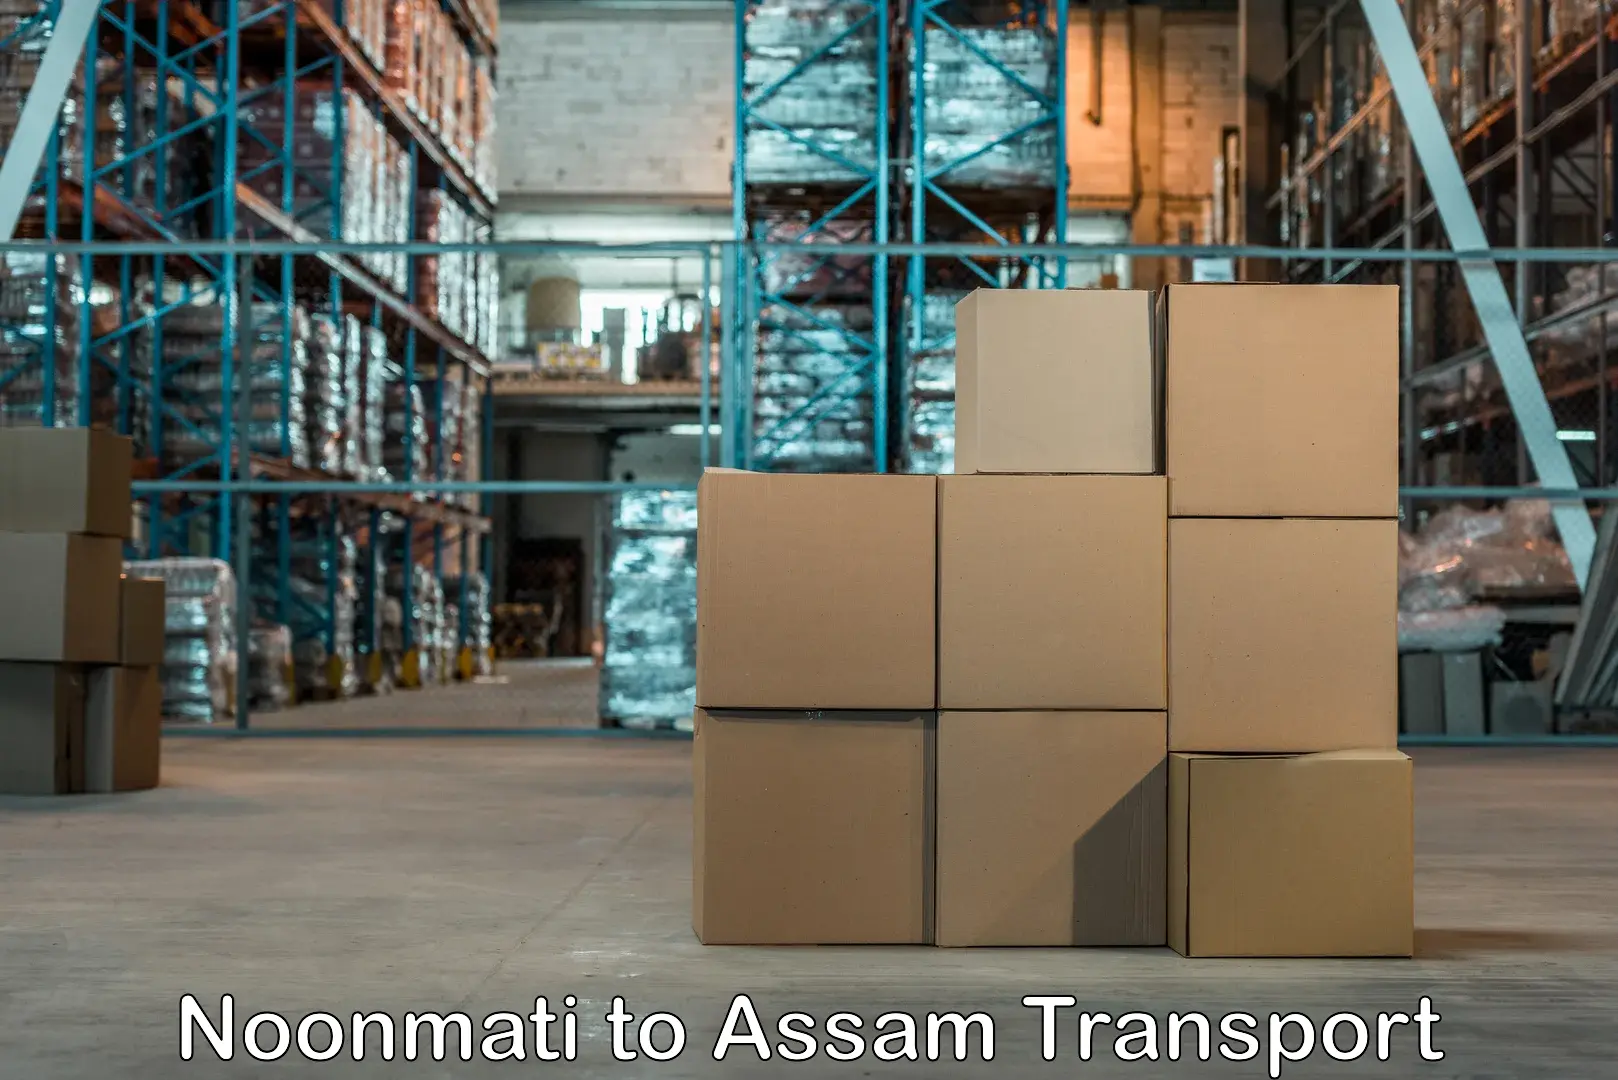 Transport in sharing Noonmati to Assam